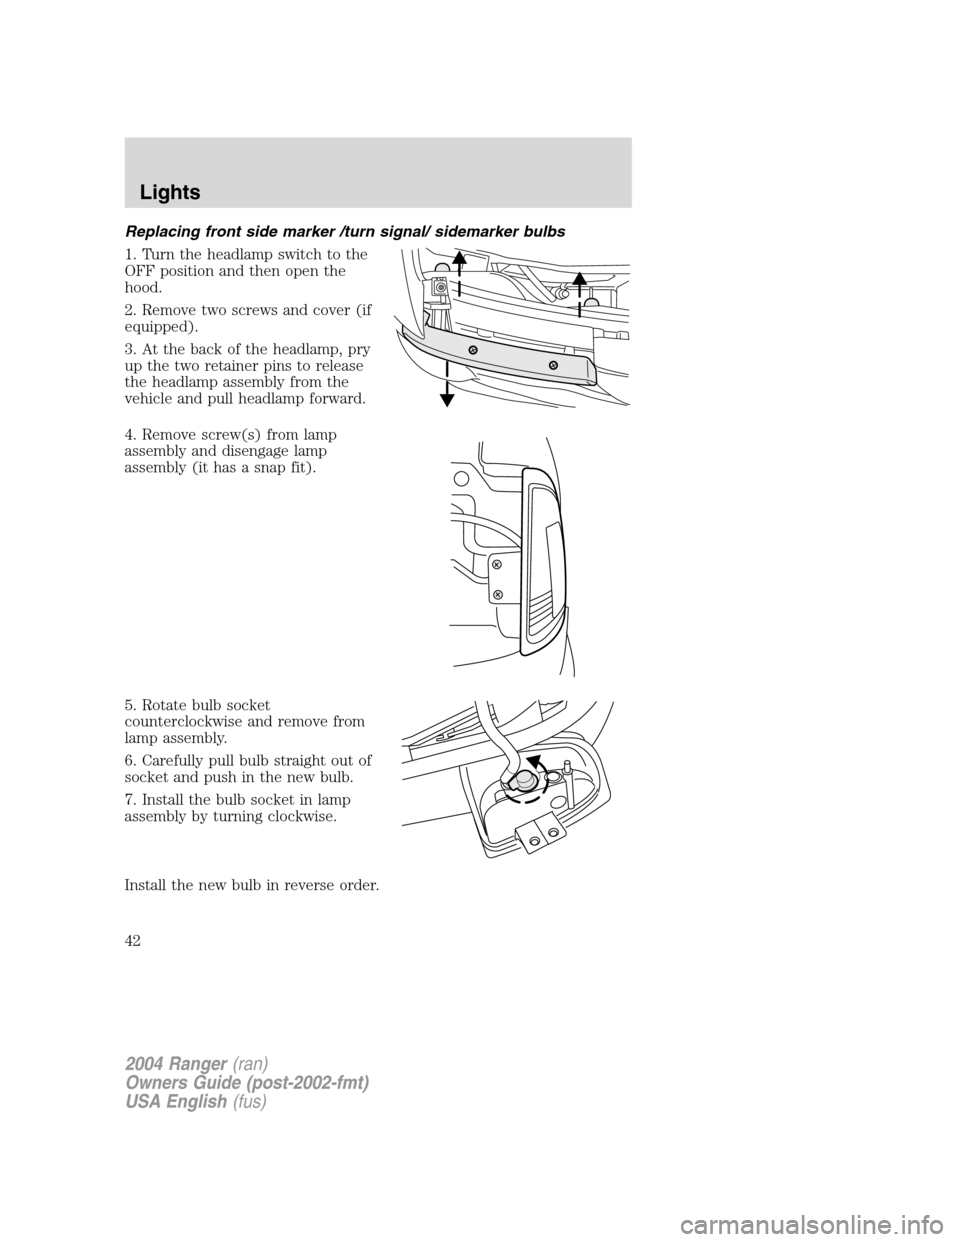 FORD RANGER 2004 2.G Service Manual Replacing front side marker /turn signal/ sidemarker bulbs
1. Turn the headlamp switch to the
OFF position and then open the
hood.
2. Remove two screws and cover (if
equipped).
3. At the back of the h